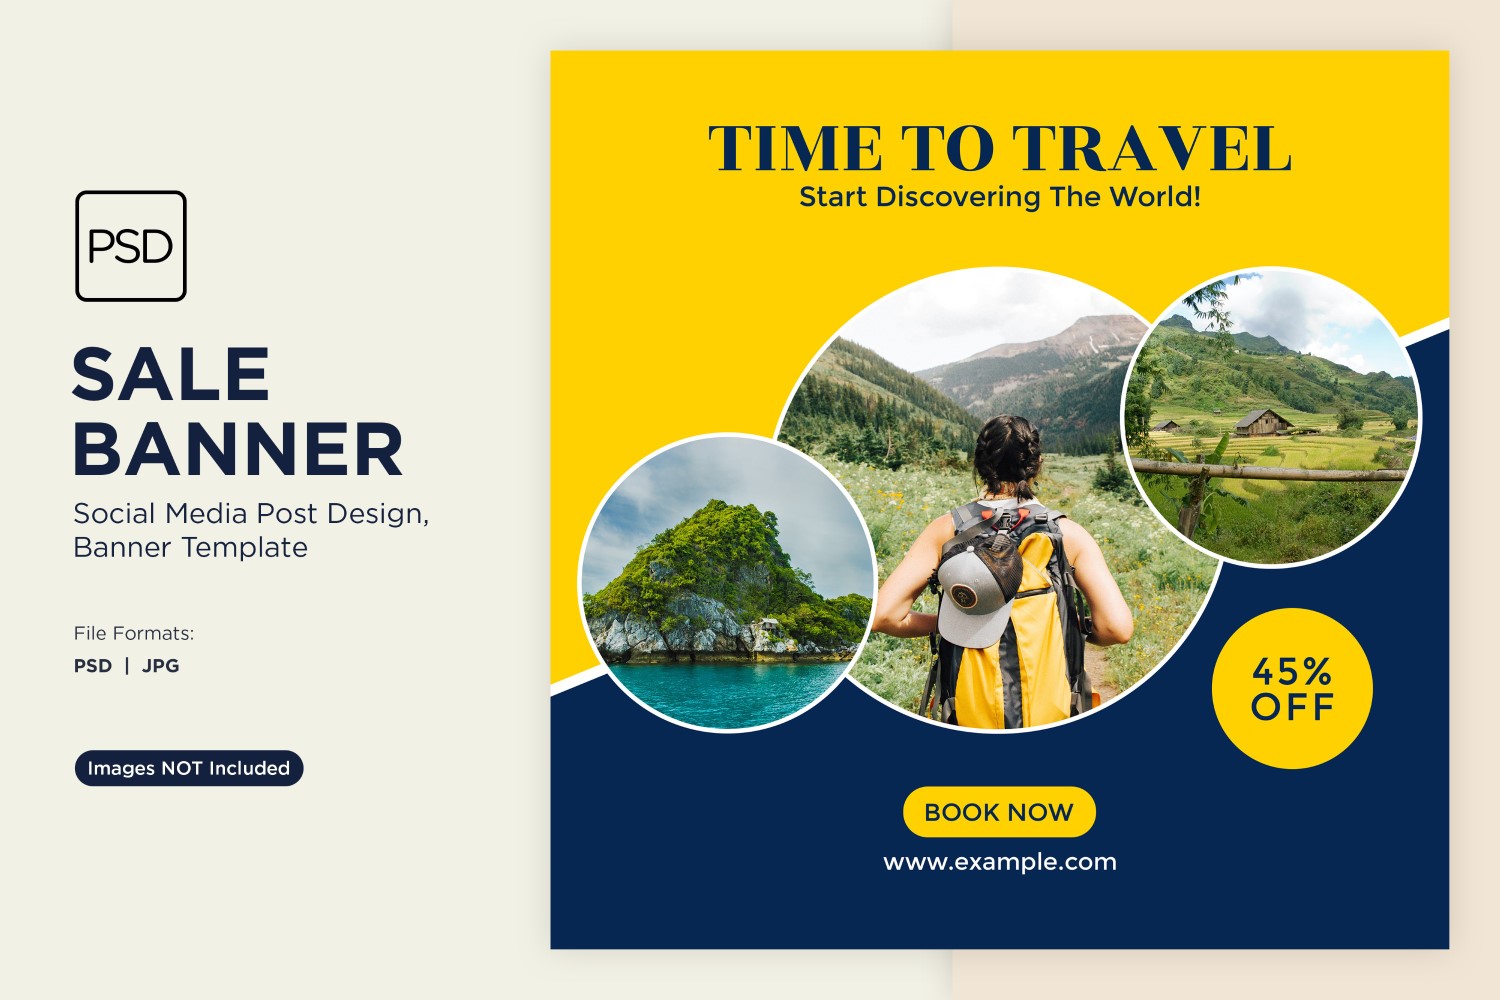 Time to Travel Banner Design Template 1